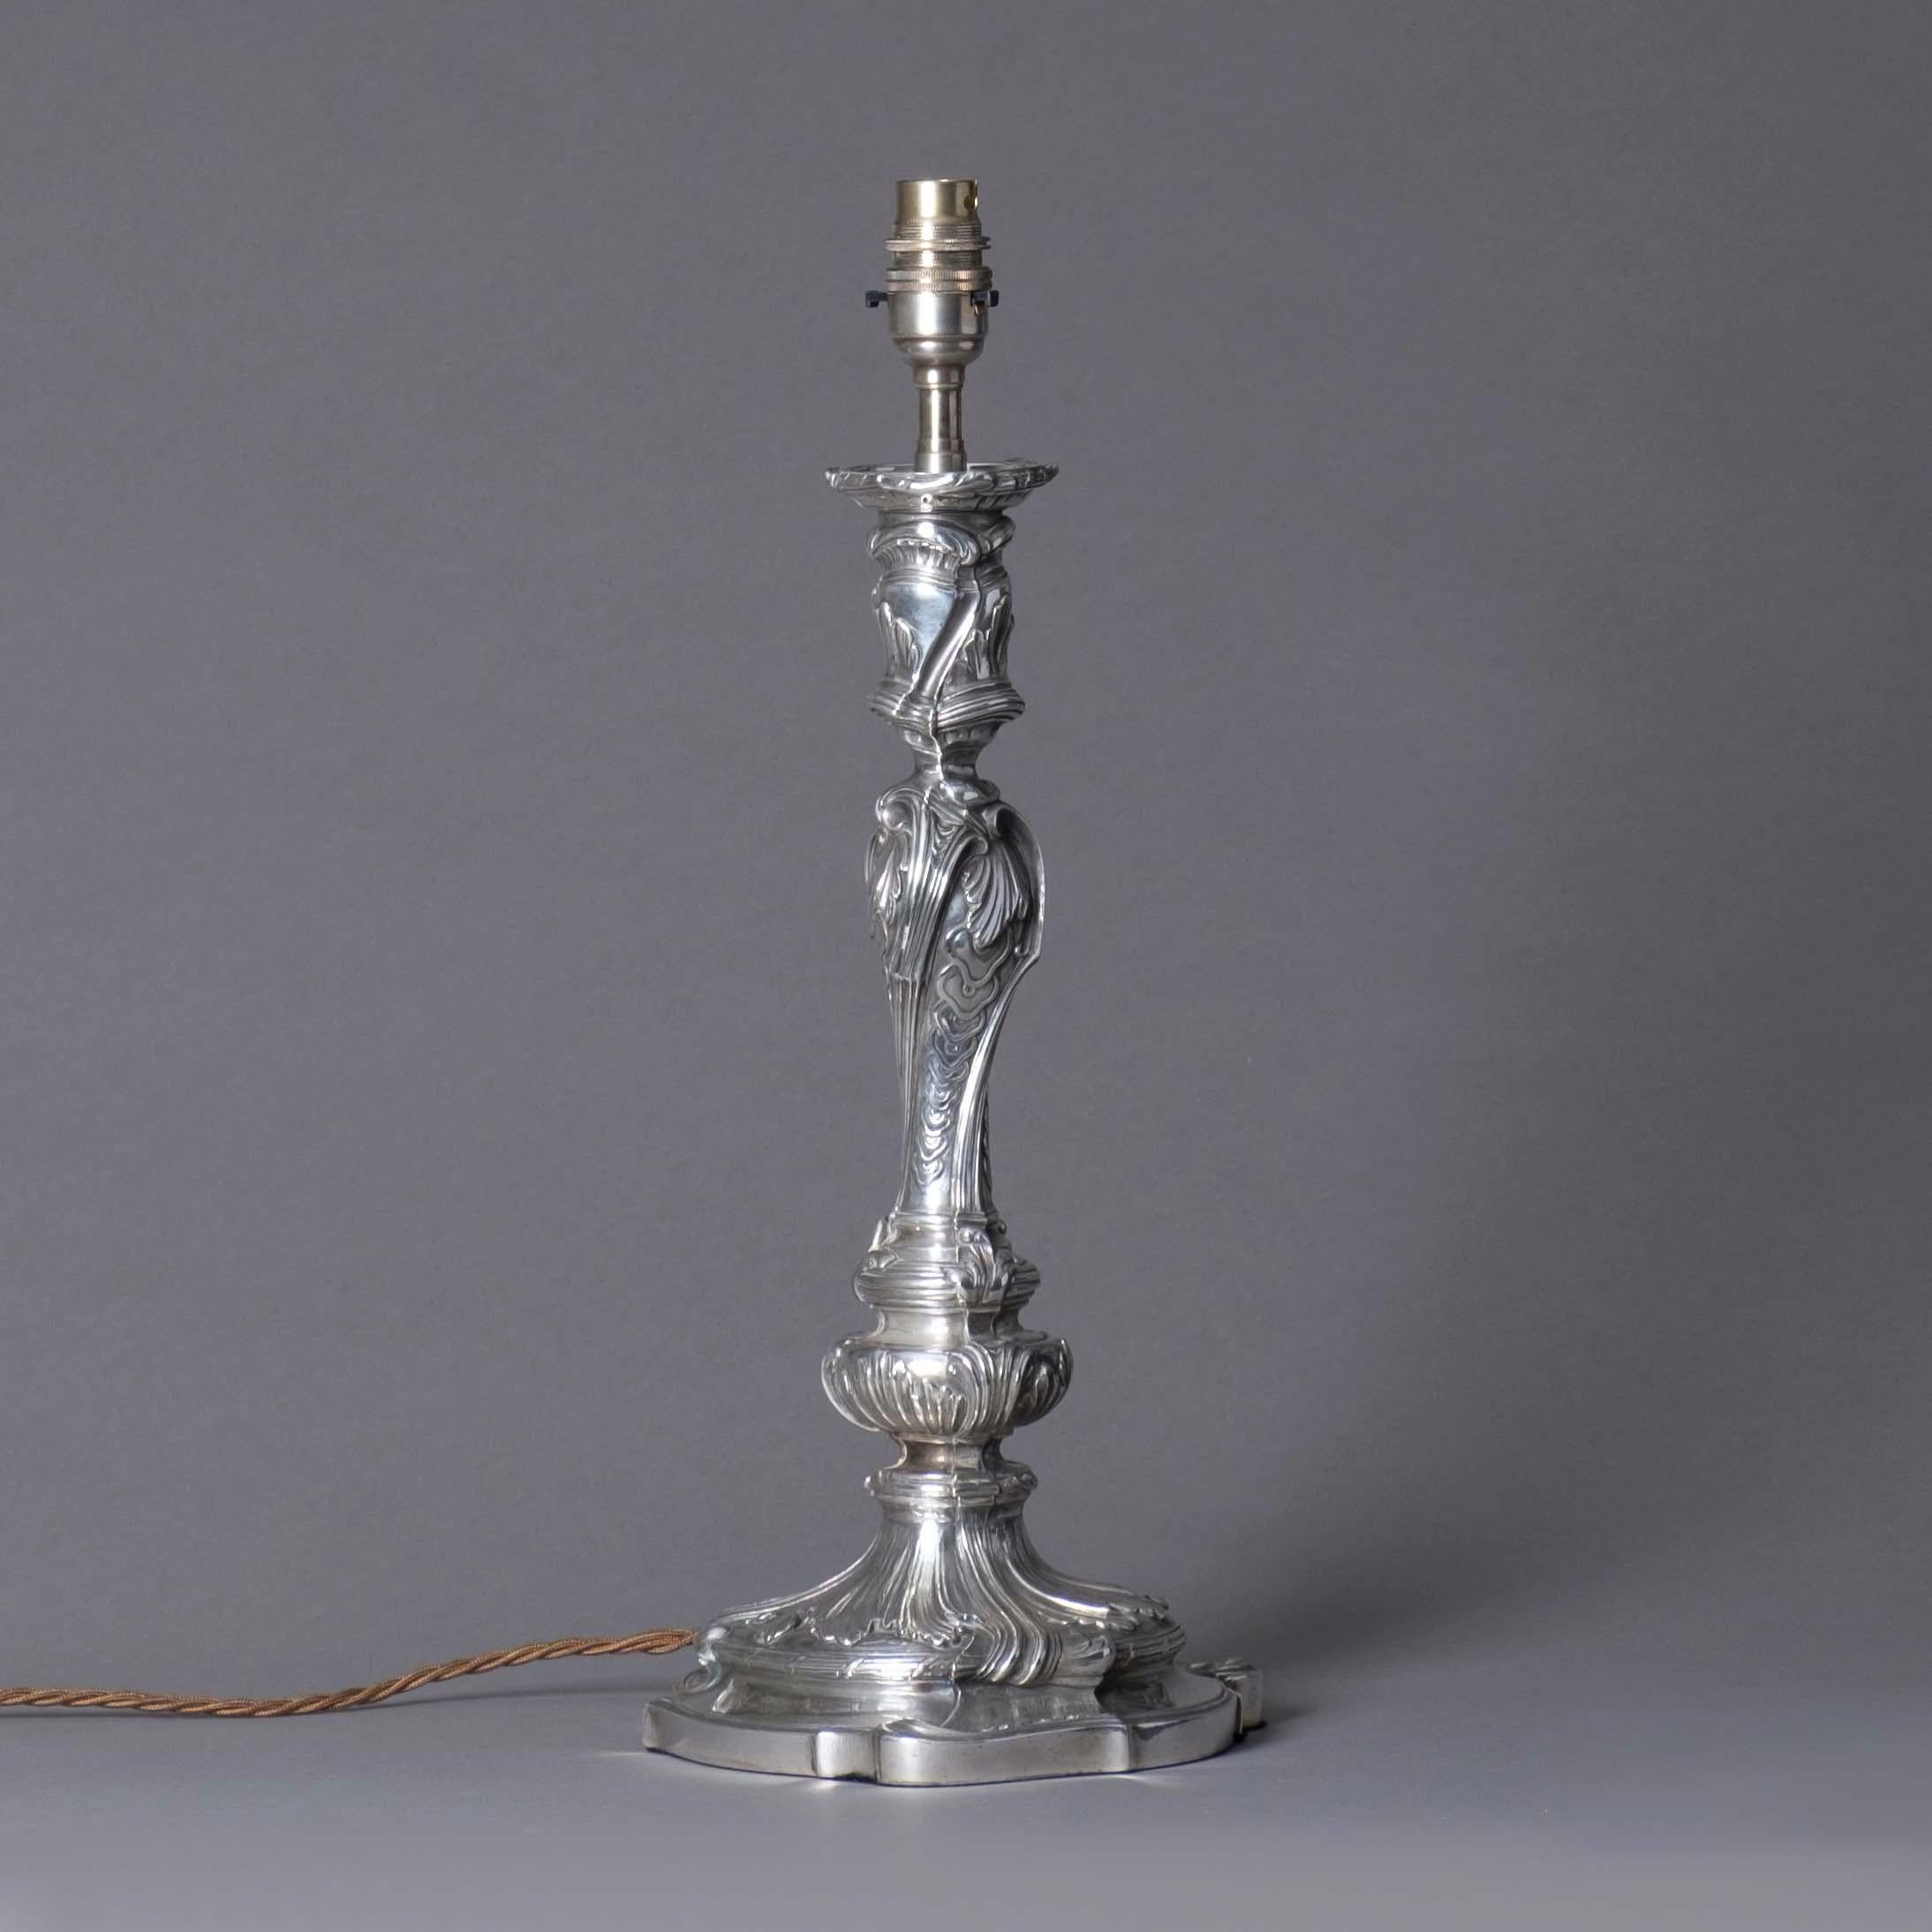 A silvered candlestick in the Louis XV Rococo manner, now mounted as a lamp base.

Height dimensions refer to height of pottery candlestick only.

Wired and tested for UK safety standards. This item can be re-wired for US, EU and worldwide